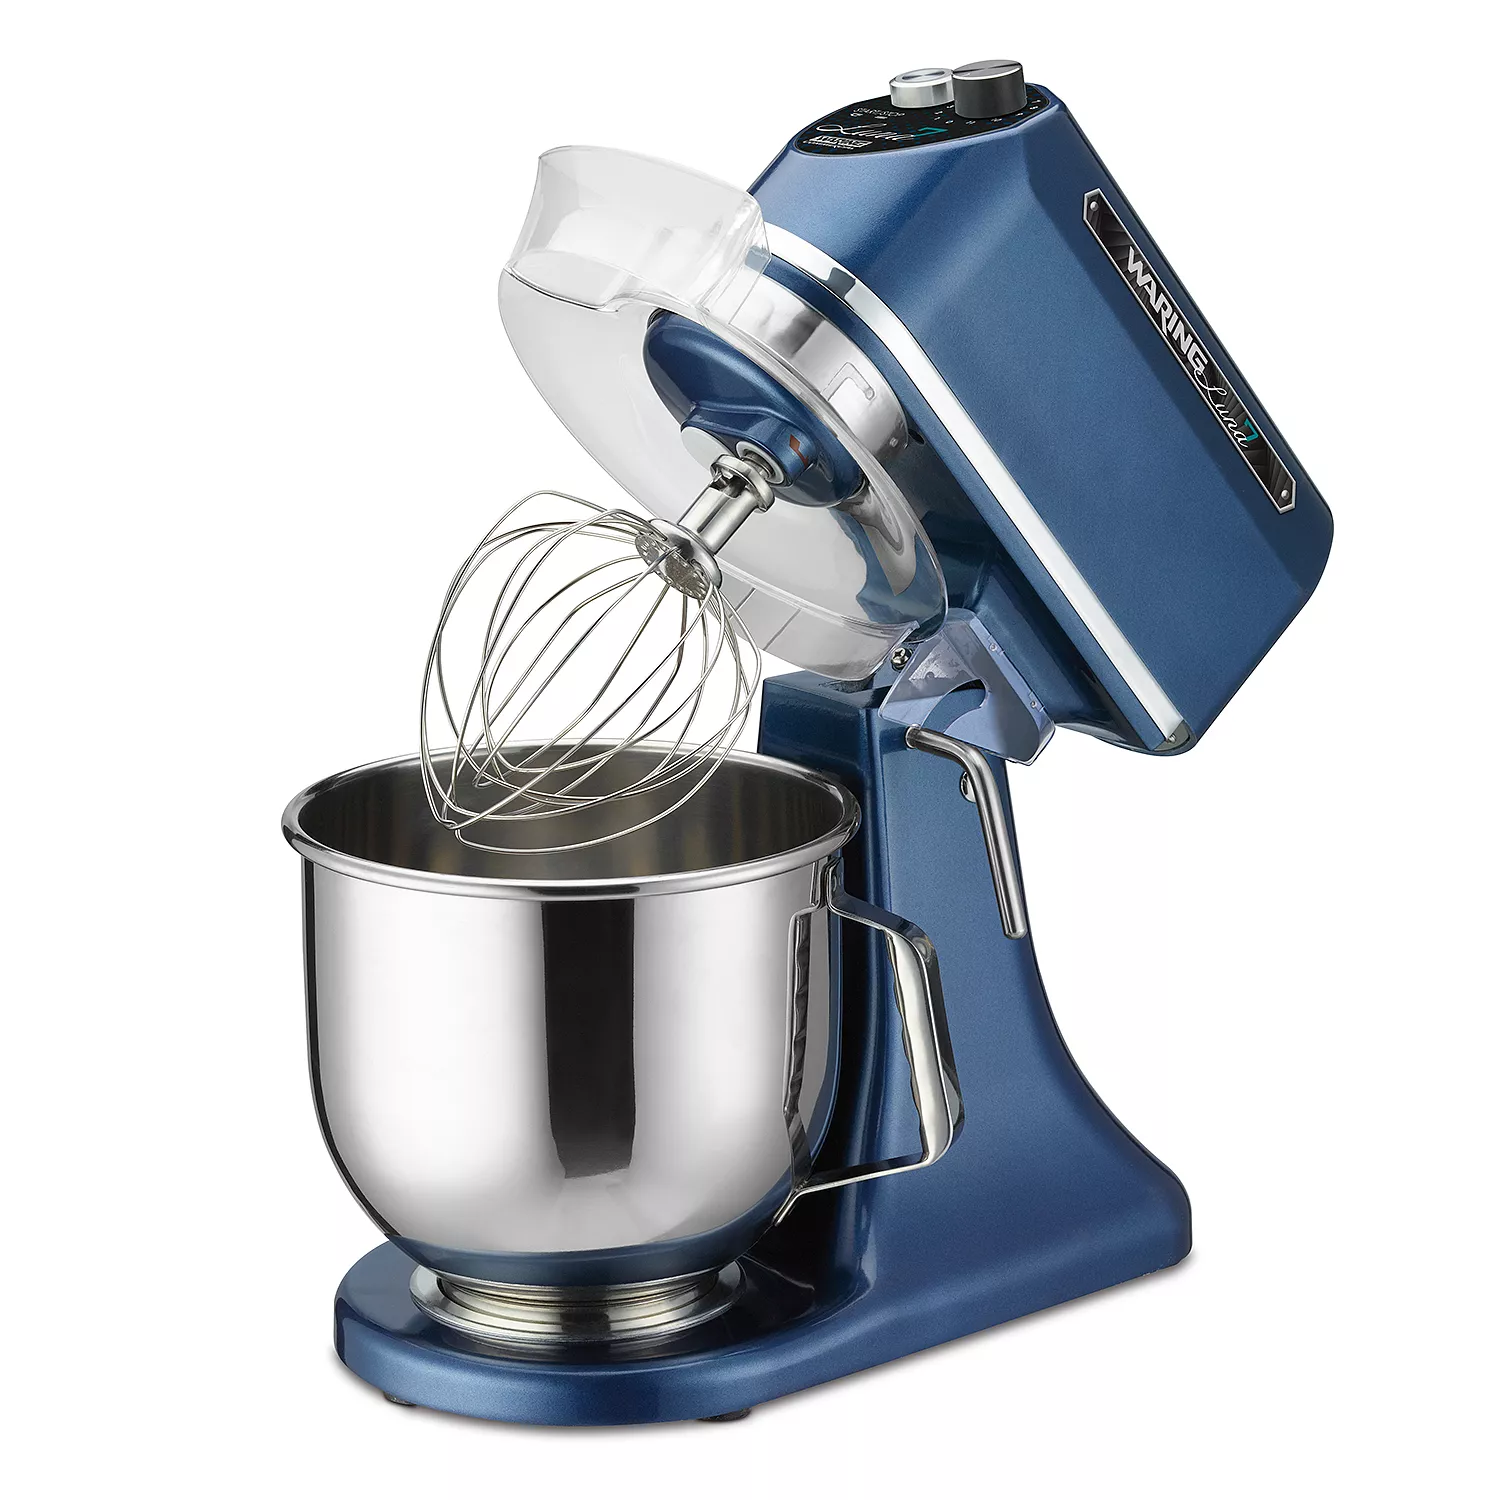 Grab this Cuisinart Stand Mixer while it's on sale for $120 off